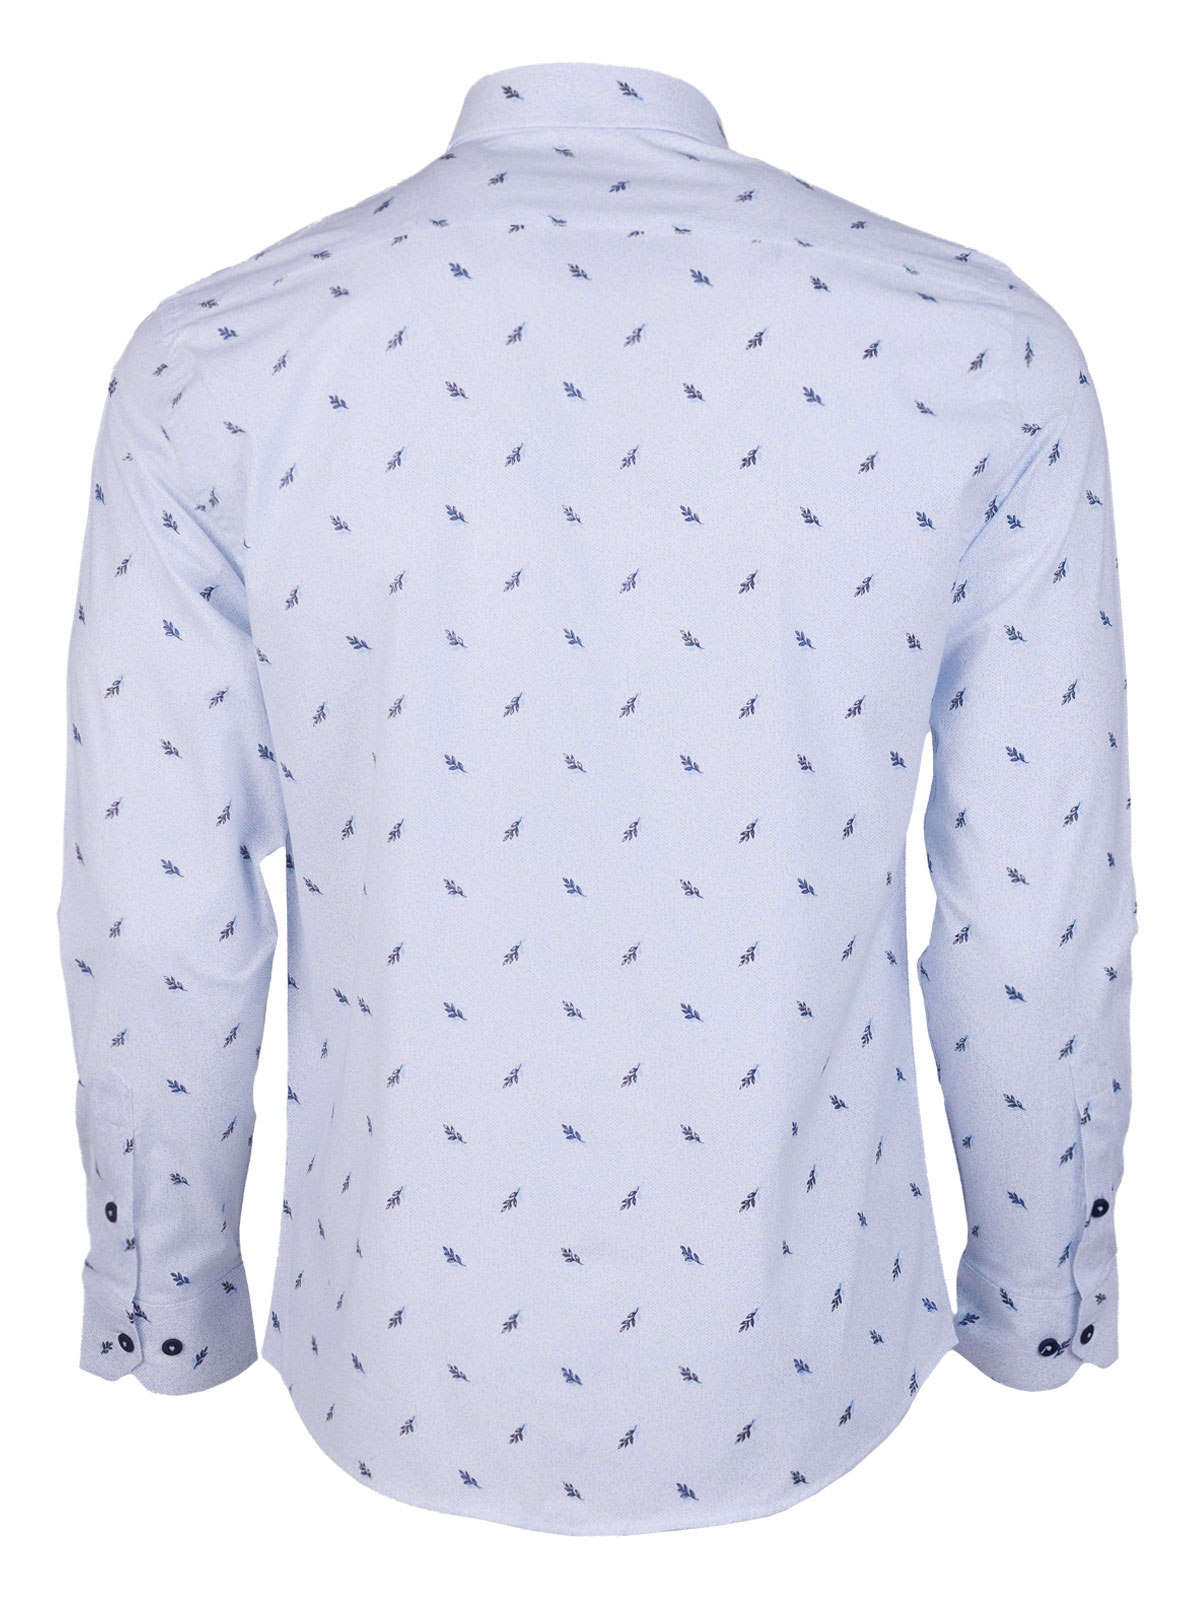 Light blue shirt with branches - 21606 € 44.43 img2